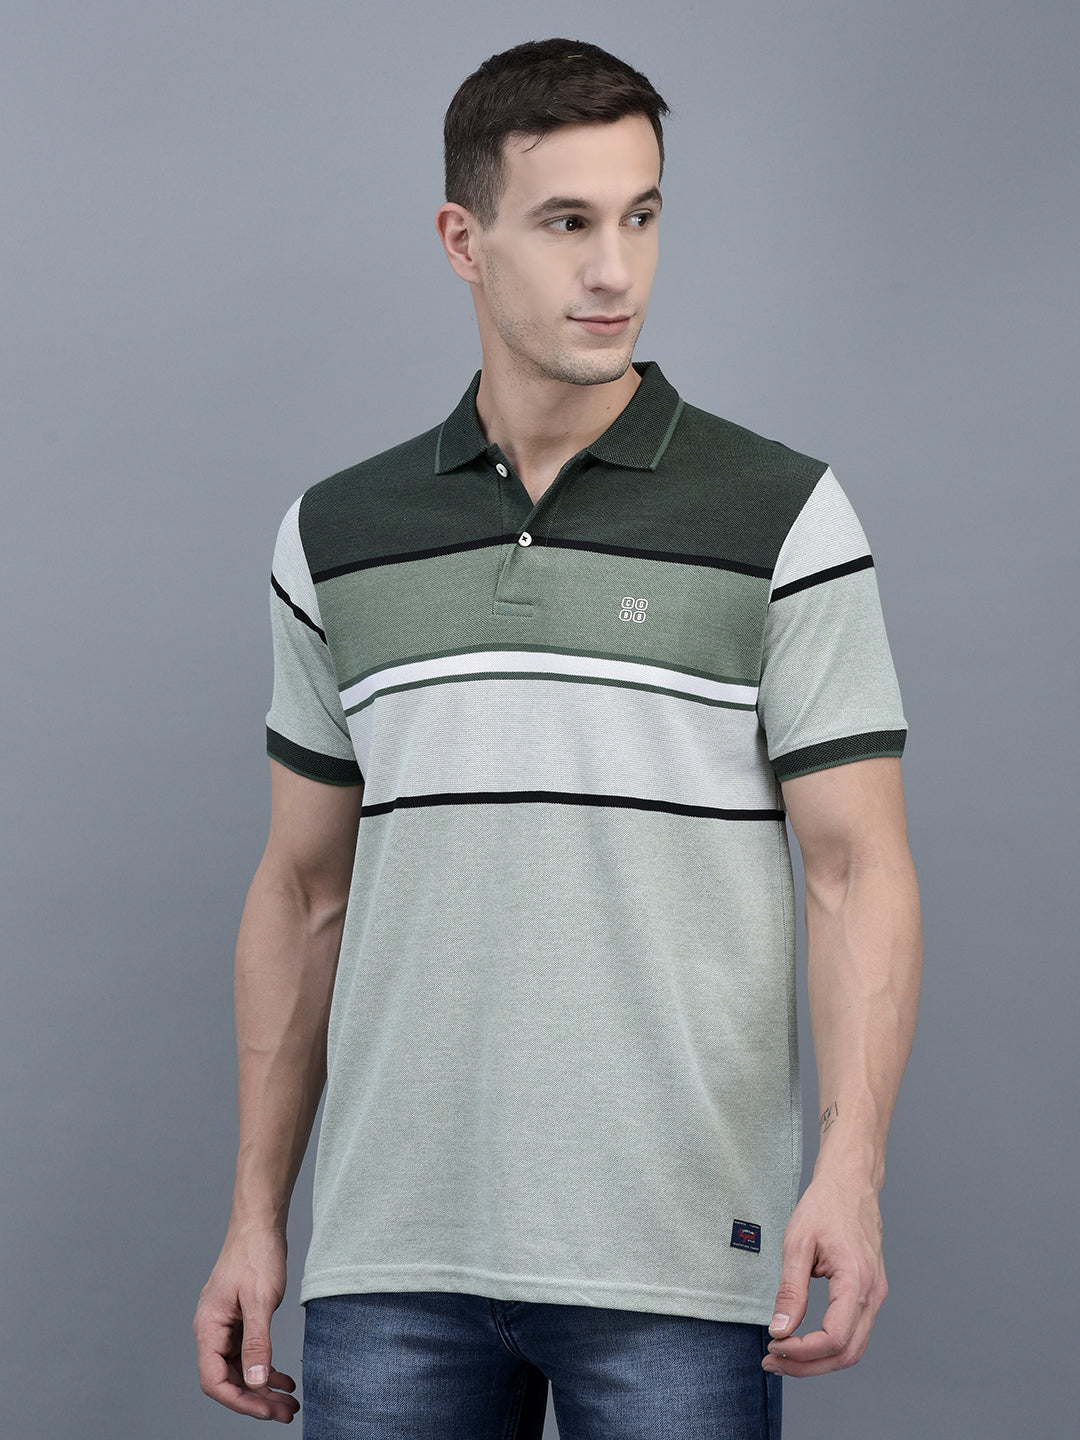 LOUIS PHILIPPE Striped Men Polo Neck Blue T-Shirt - Buy LOUIS PHILIPPE  Striped Men Polo Neck Blue T-Shirt Online at Best Prices in India